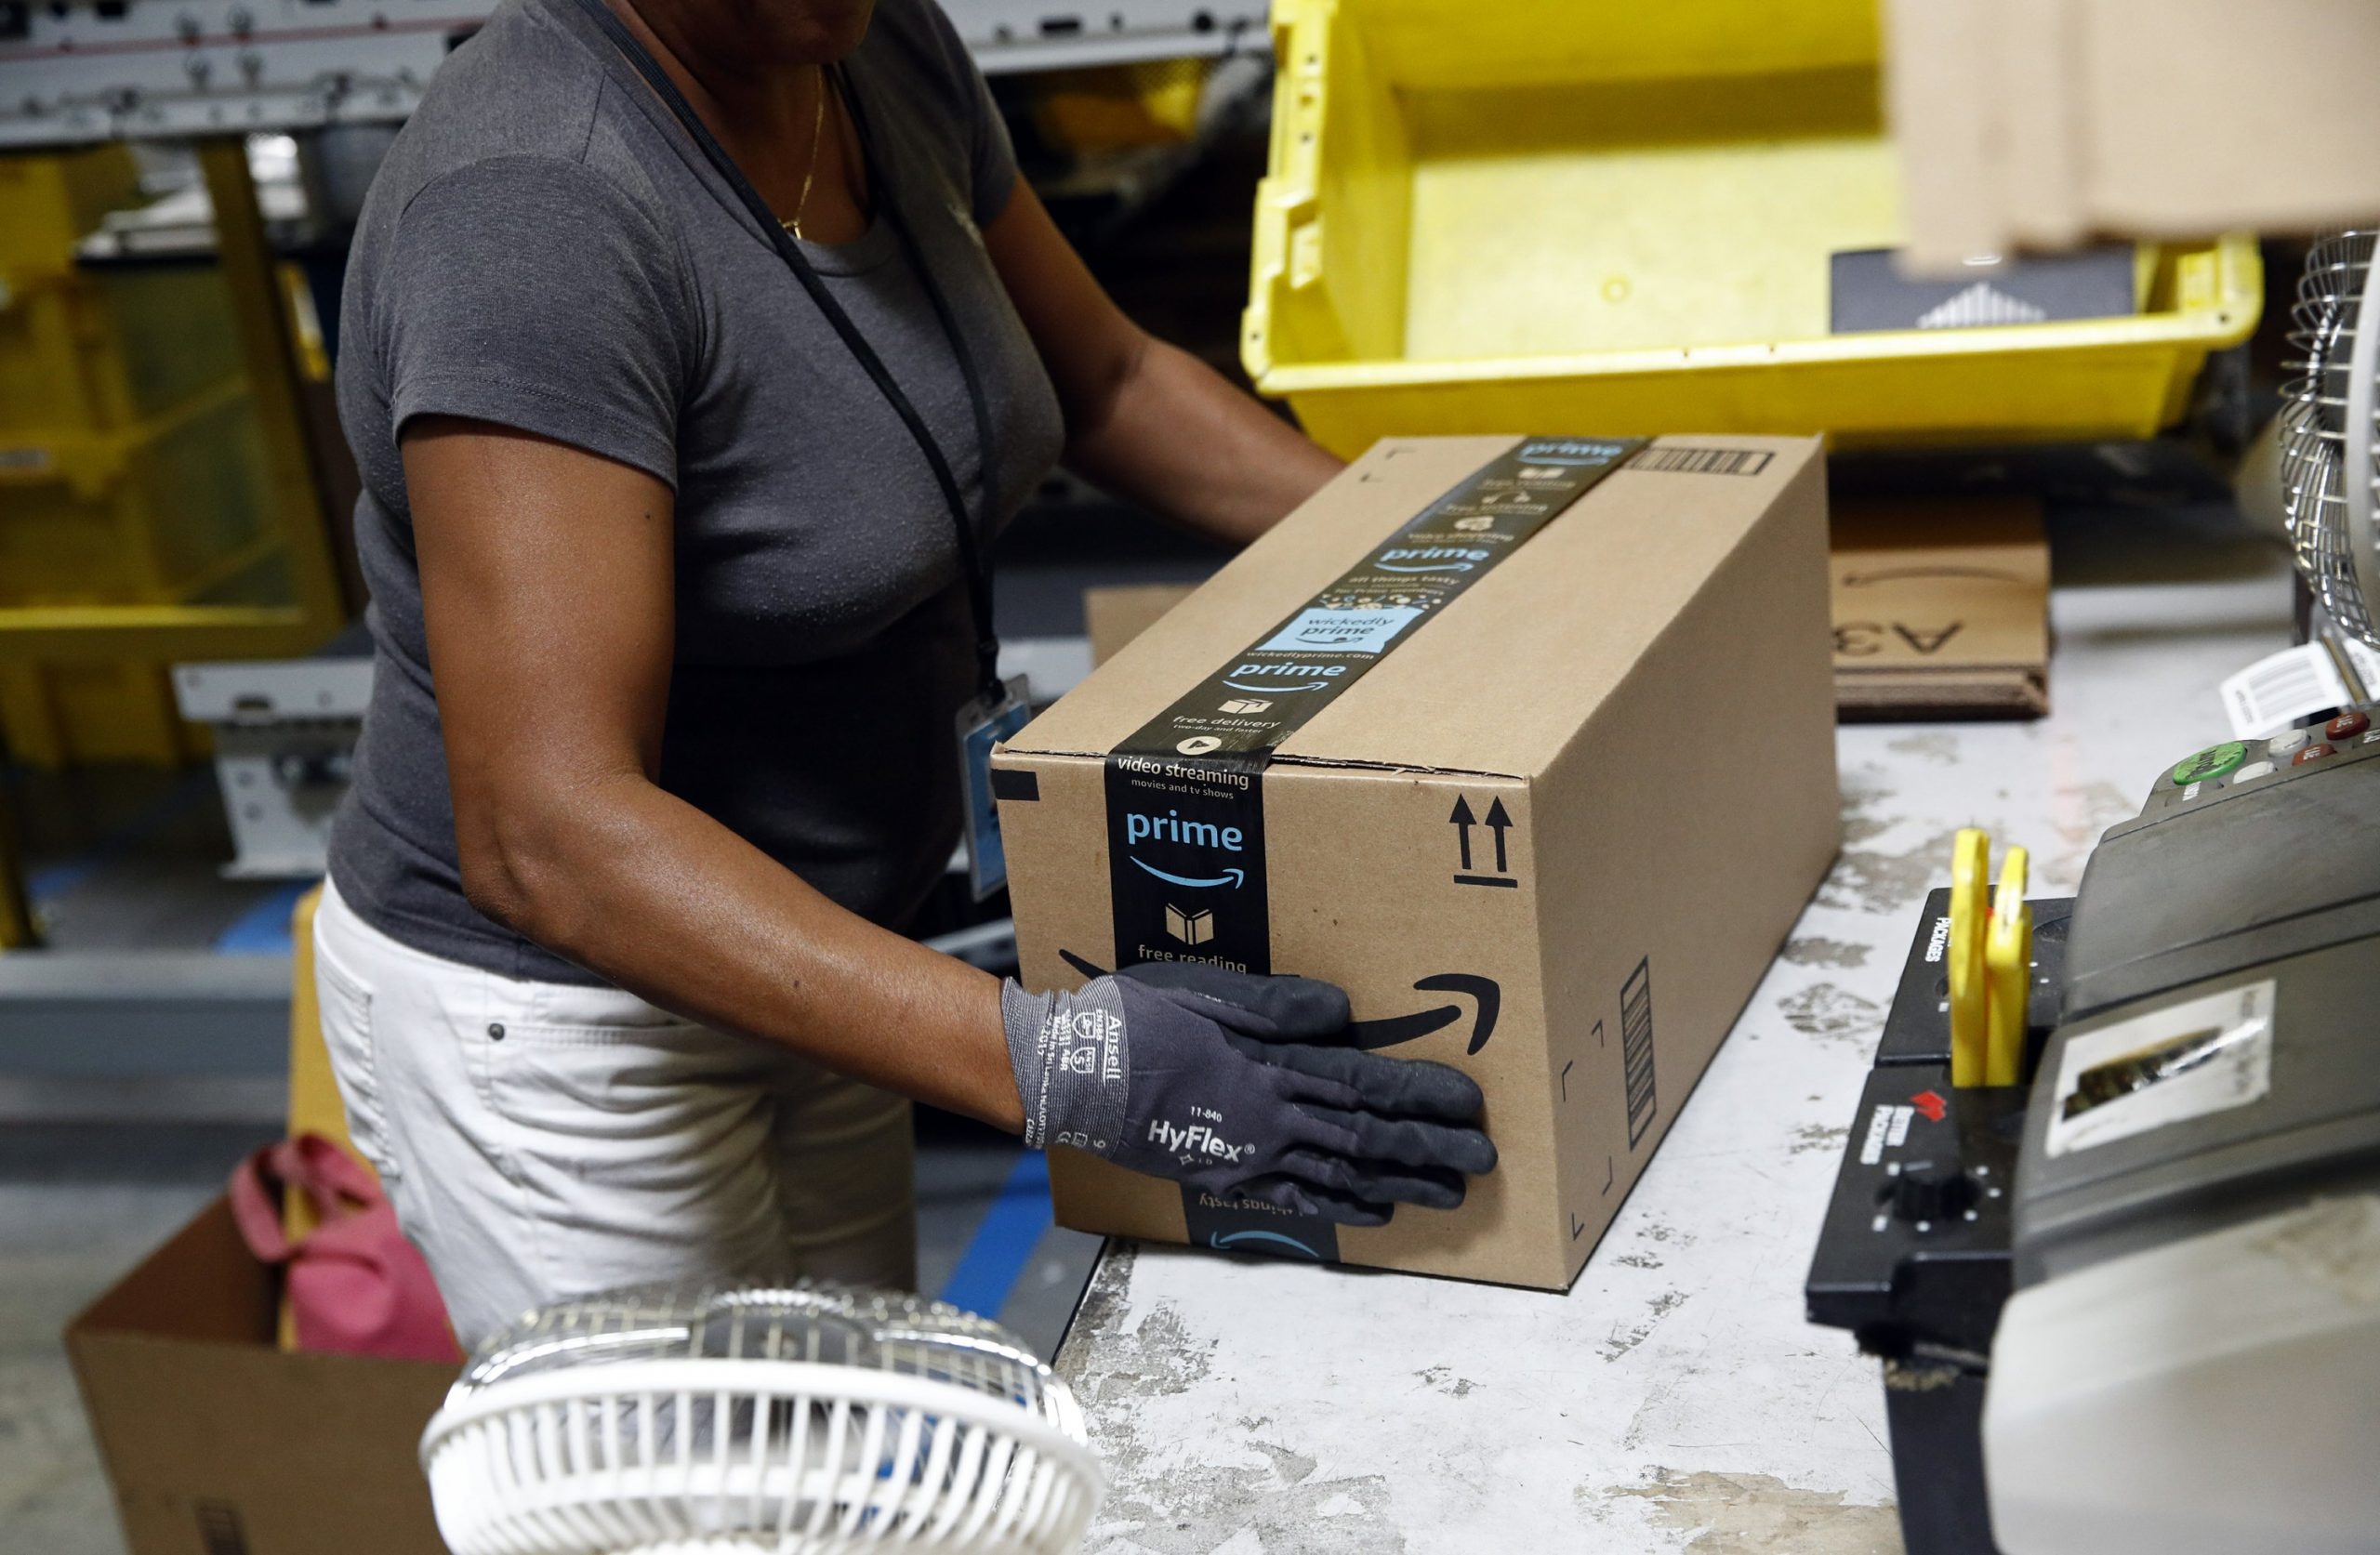 Amazon Will Hire 100,000 New Workers To Deal With High Coronavirus Demand